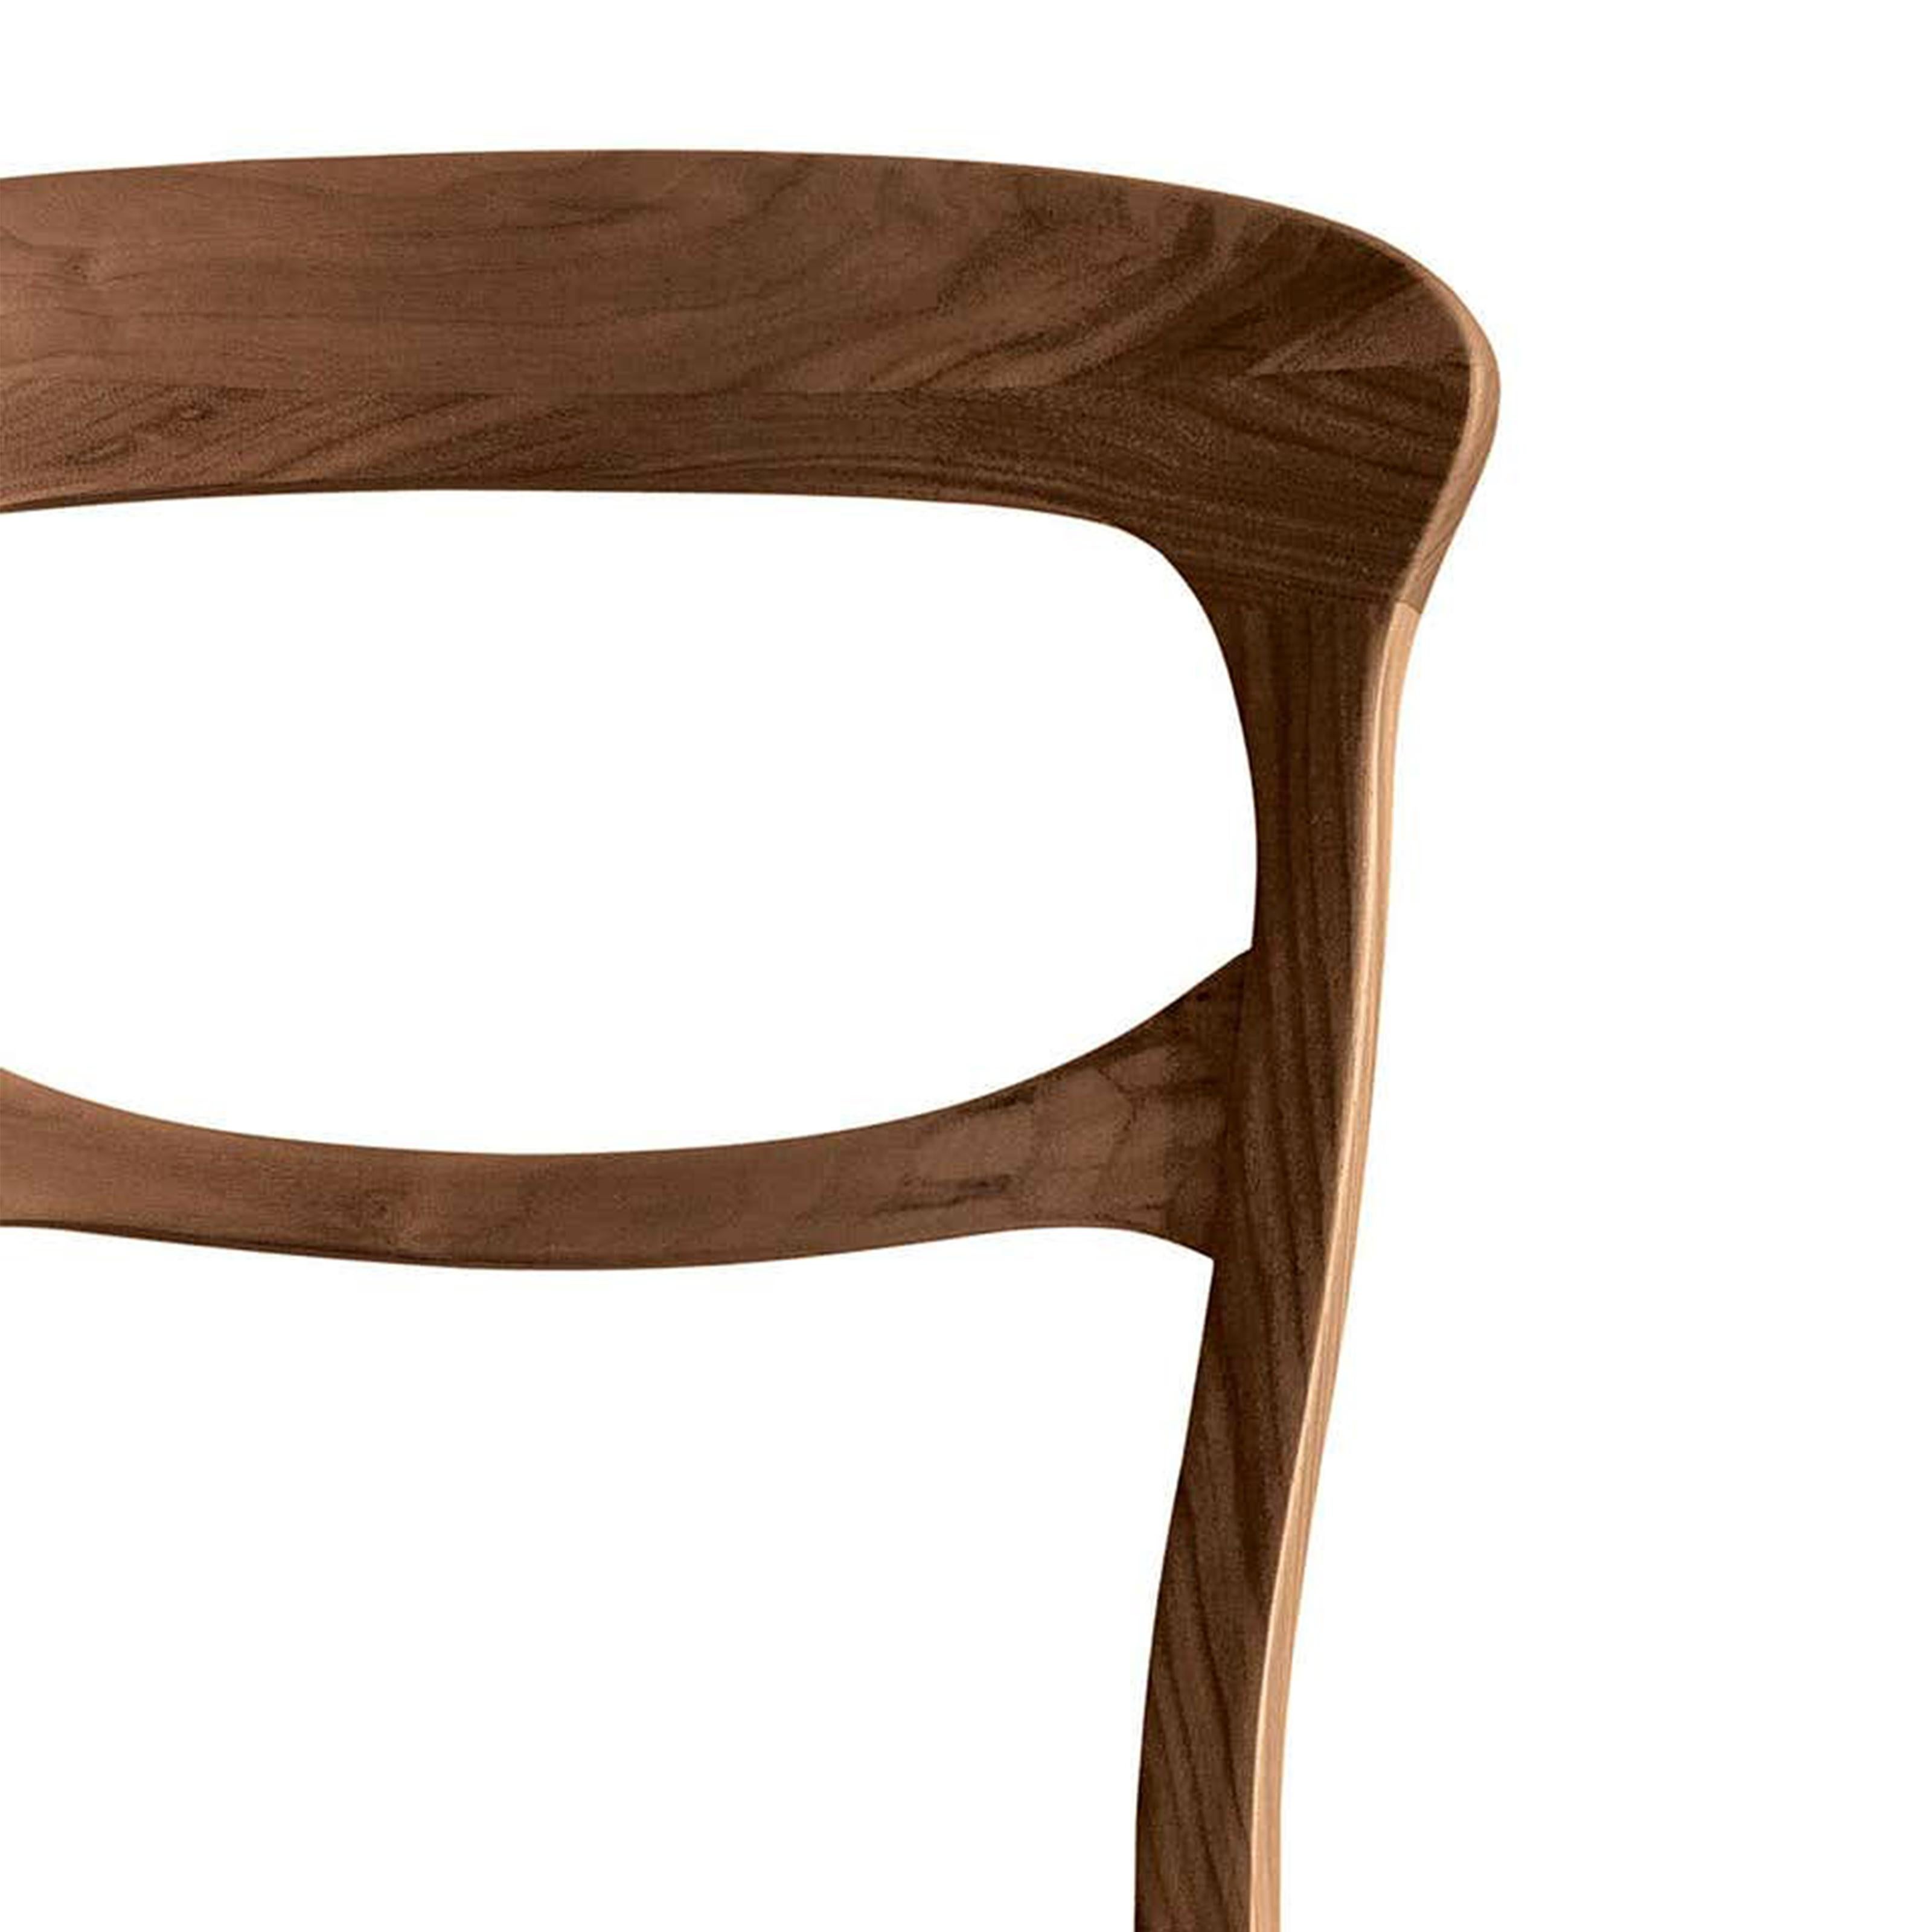 Modern Capotavola Solid Wood Chair, Walnut in Hand-Made Natural Finish, Contemporary For Sale